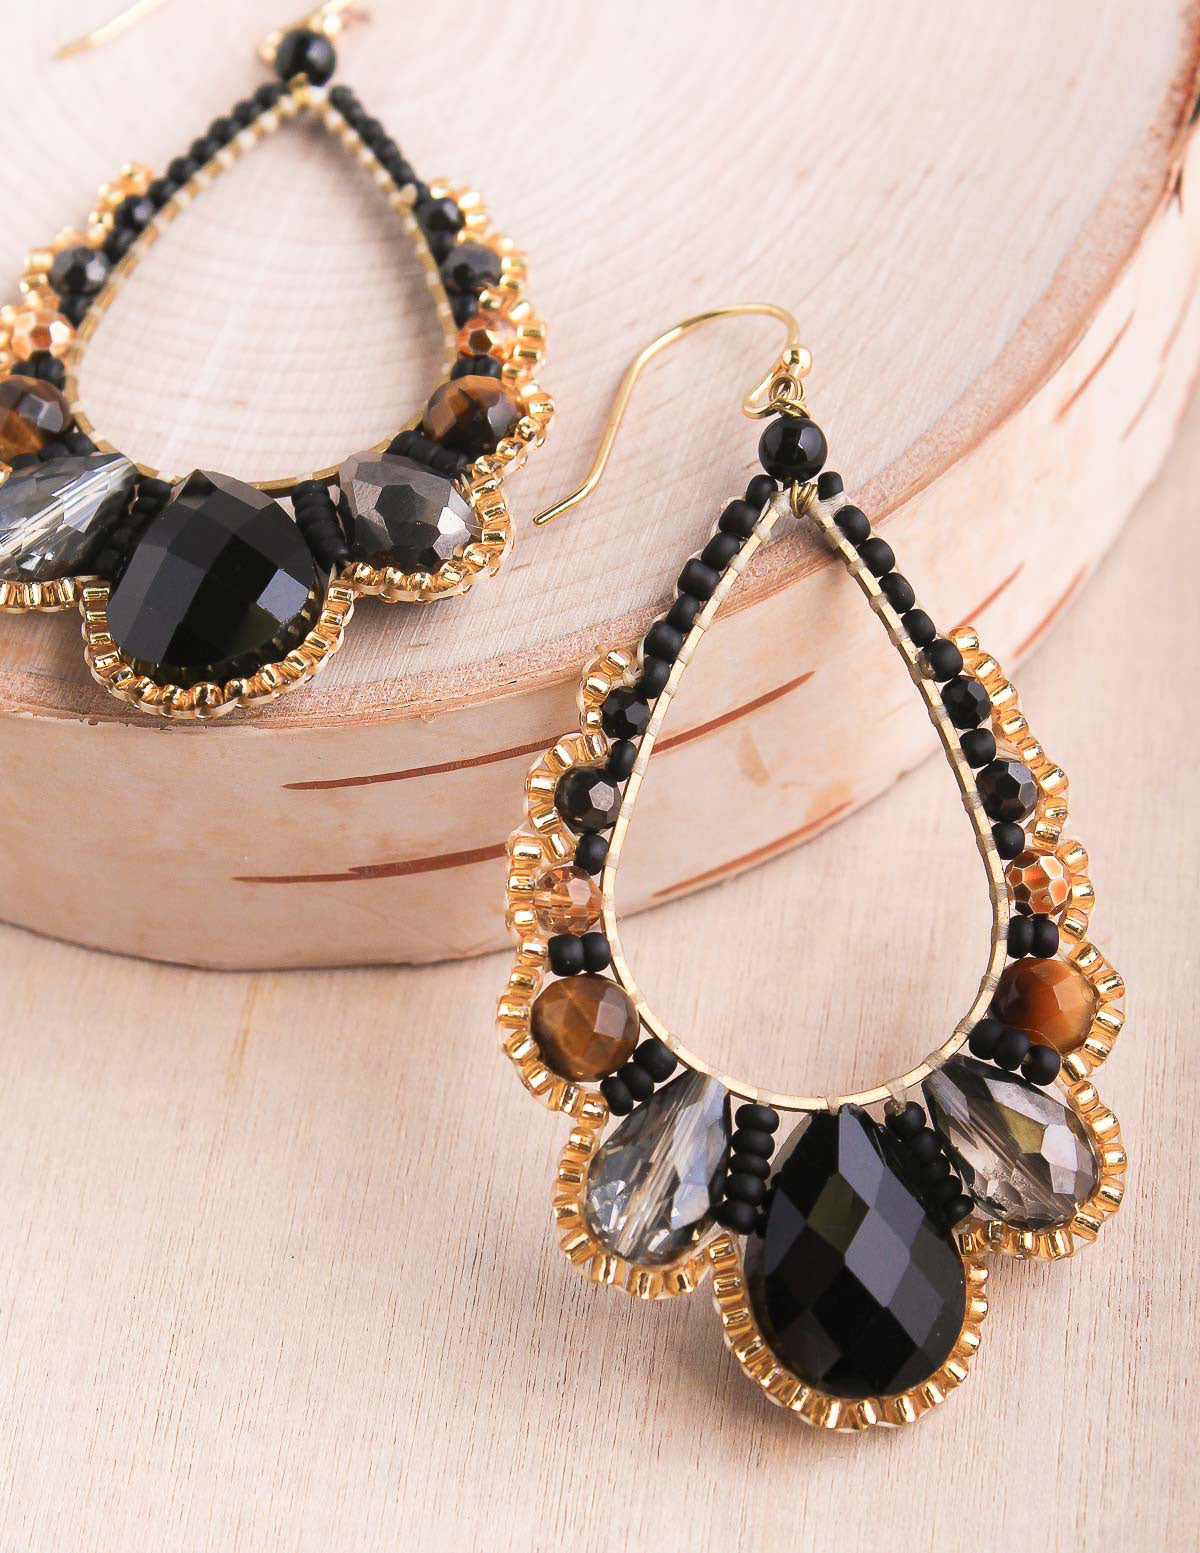 teardrop, Thai crystal, statement earring, dazzle, glam, bali queen, coco rose